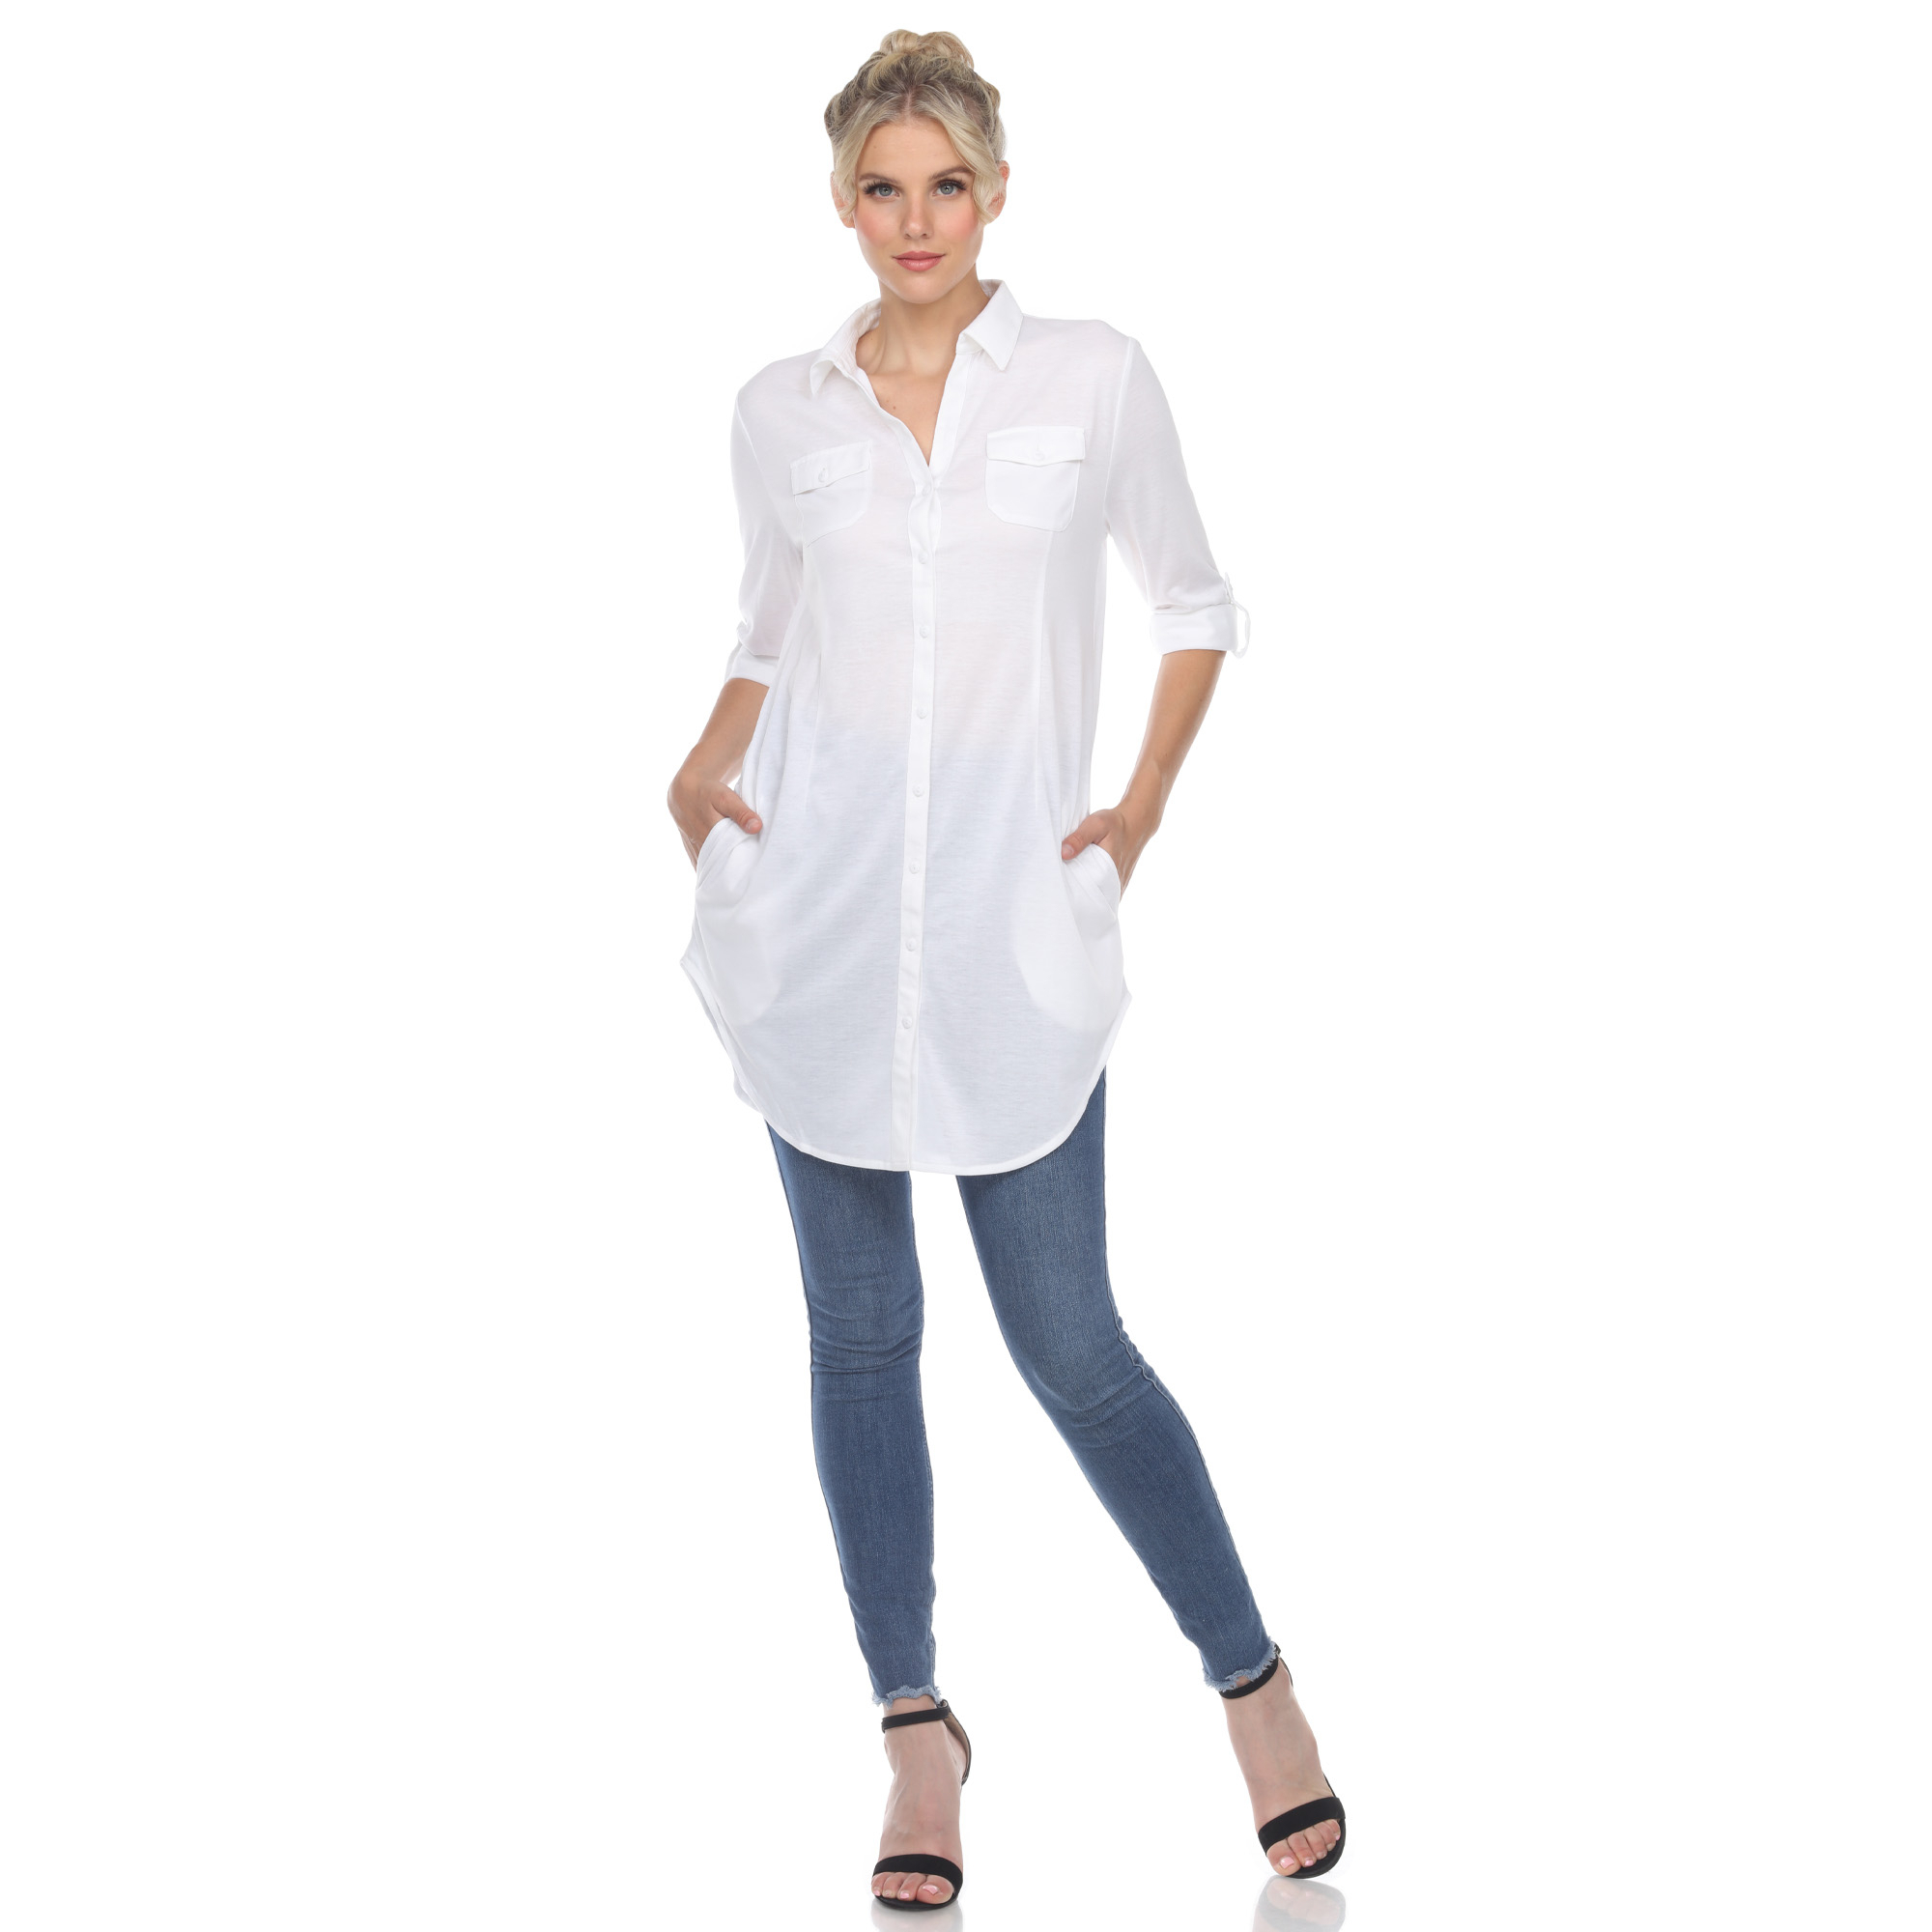 White Mark Women's Stretchy Quarter Sleeve Button Down Tunic Top With Pockets - White, 1X